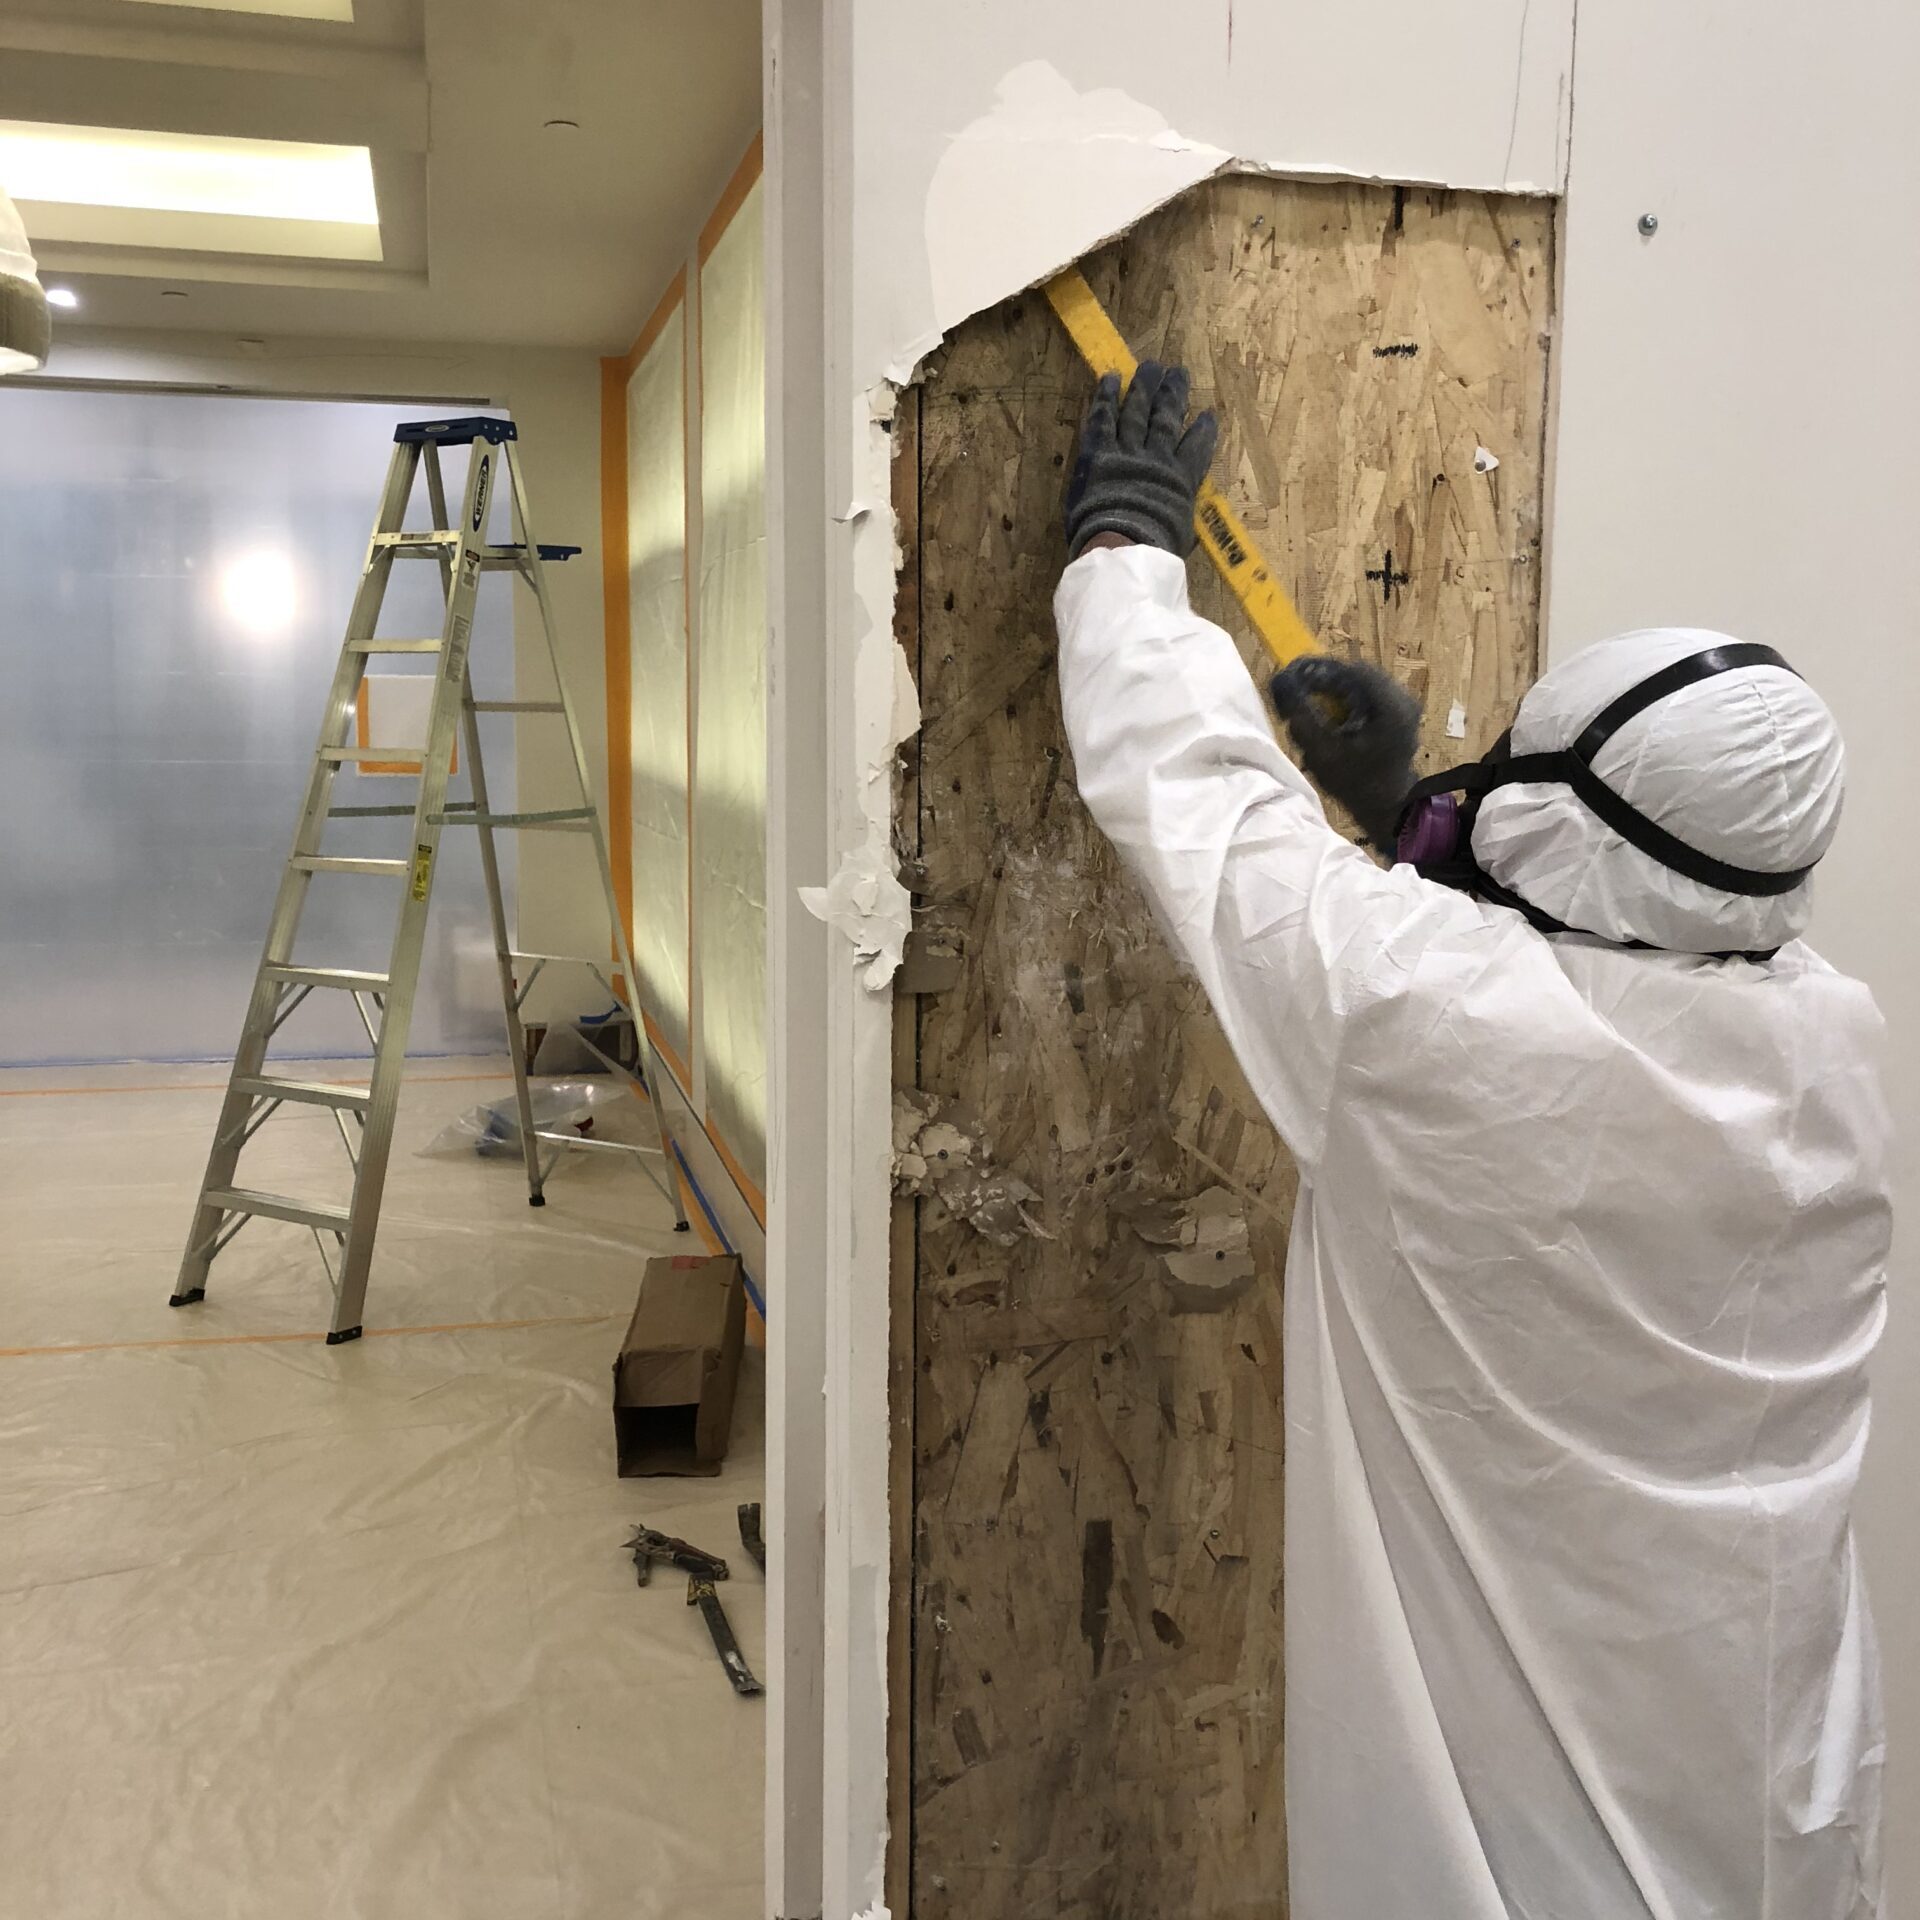 Mold fix company in Orange County specialist removing damaged drywall